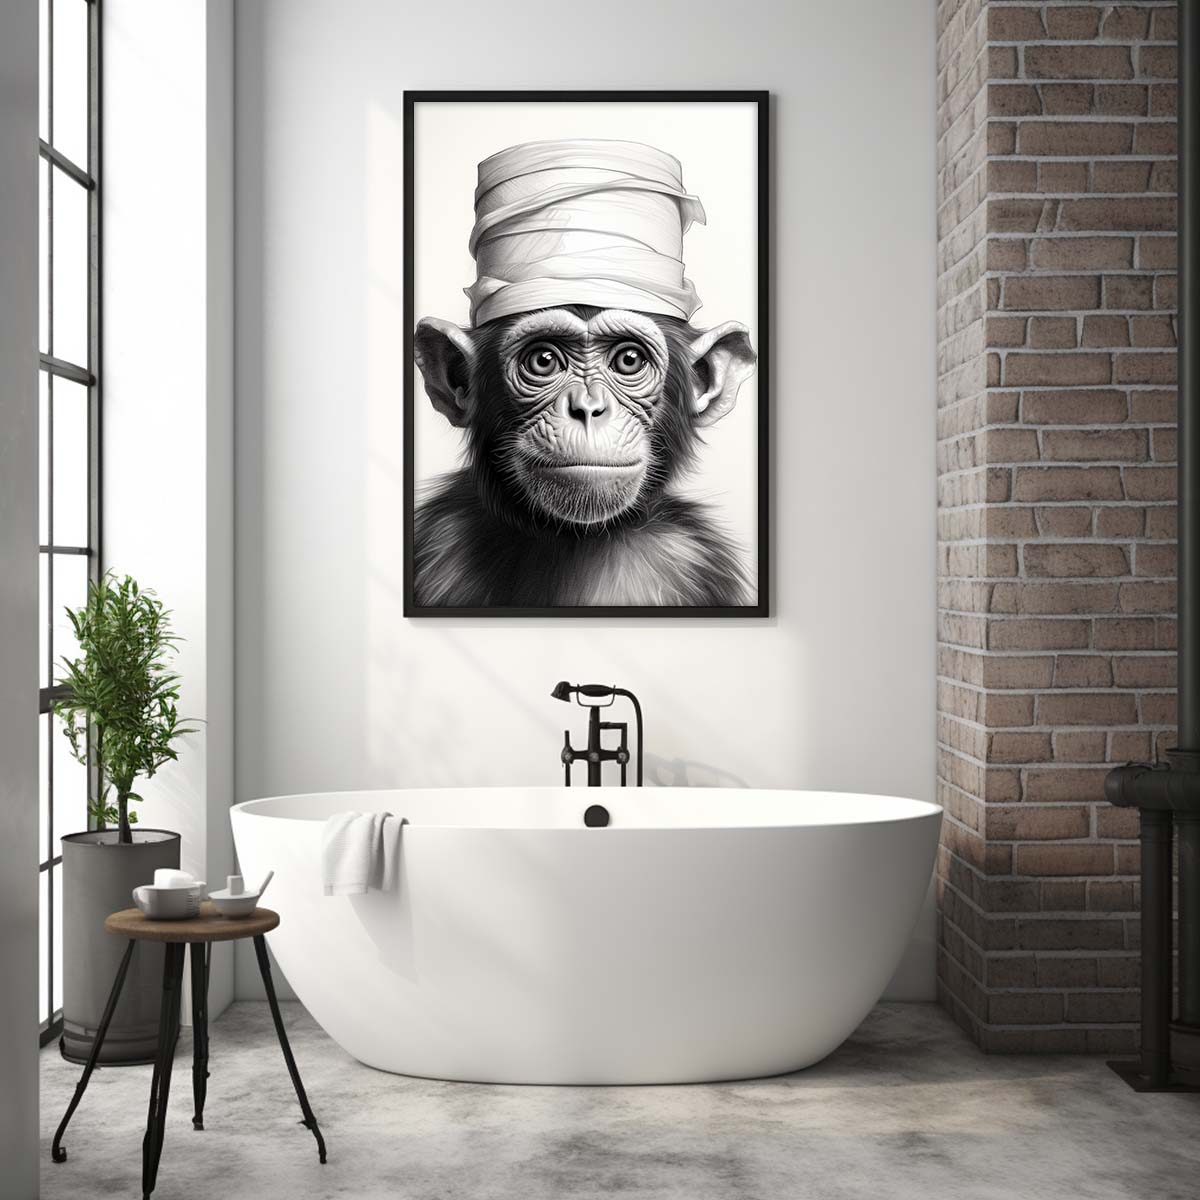 Cute Monkey With Toilet Paper, Canvas Or Poster, Funny Monkey Art, Bathroom Wall Decor, Home Decor, Bathroom Wall Art, Monkey Wall Decor, Animal Decor, Animal Gift, Animal Illustration, Digital Download